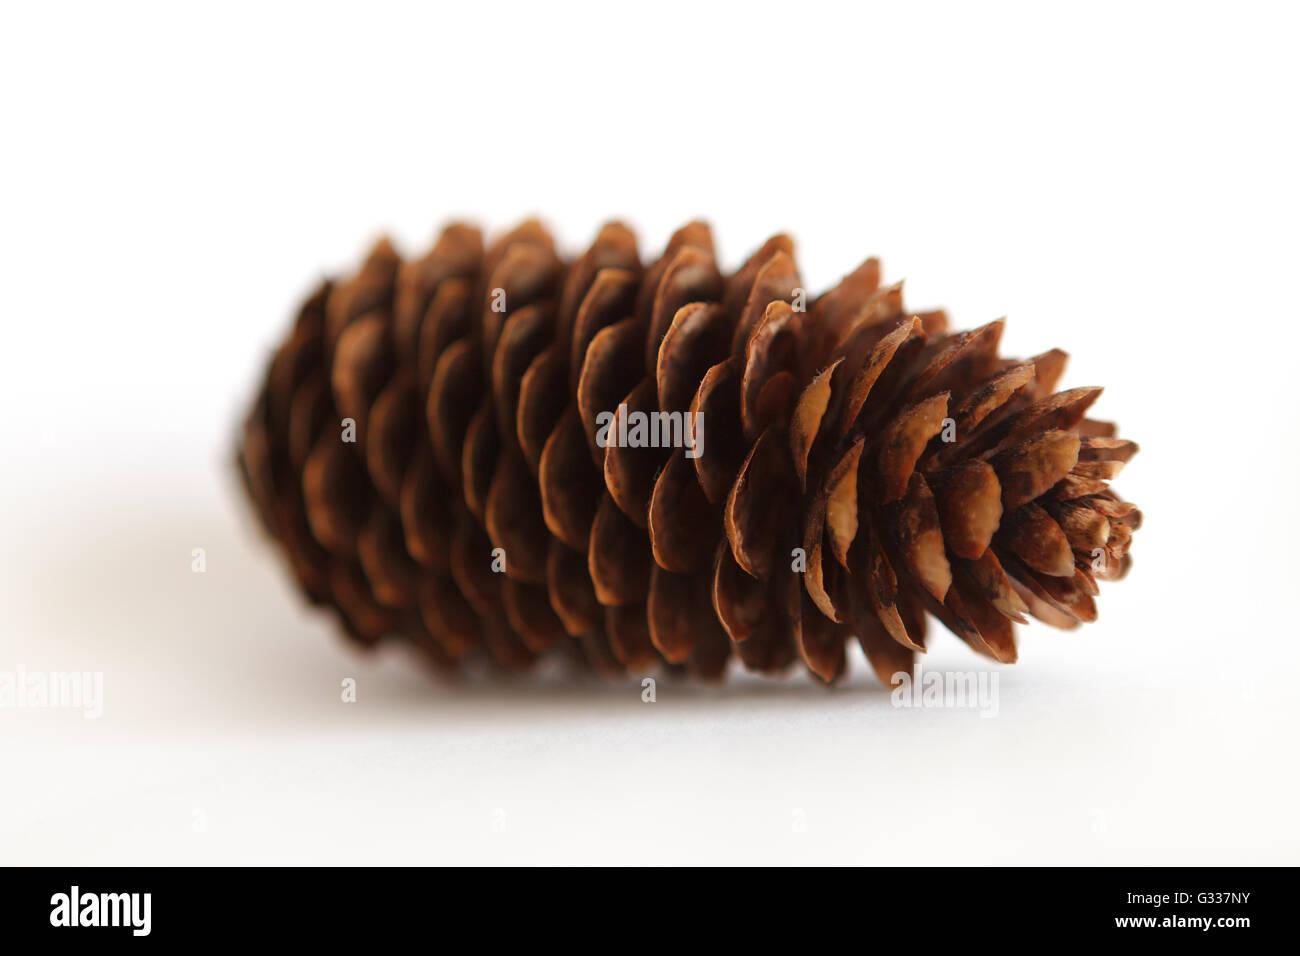 Fir tree cones on a white background Stock Photo